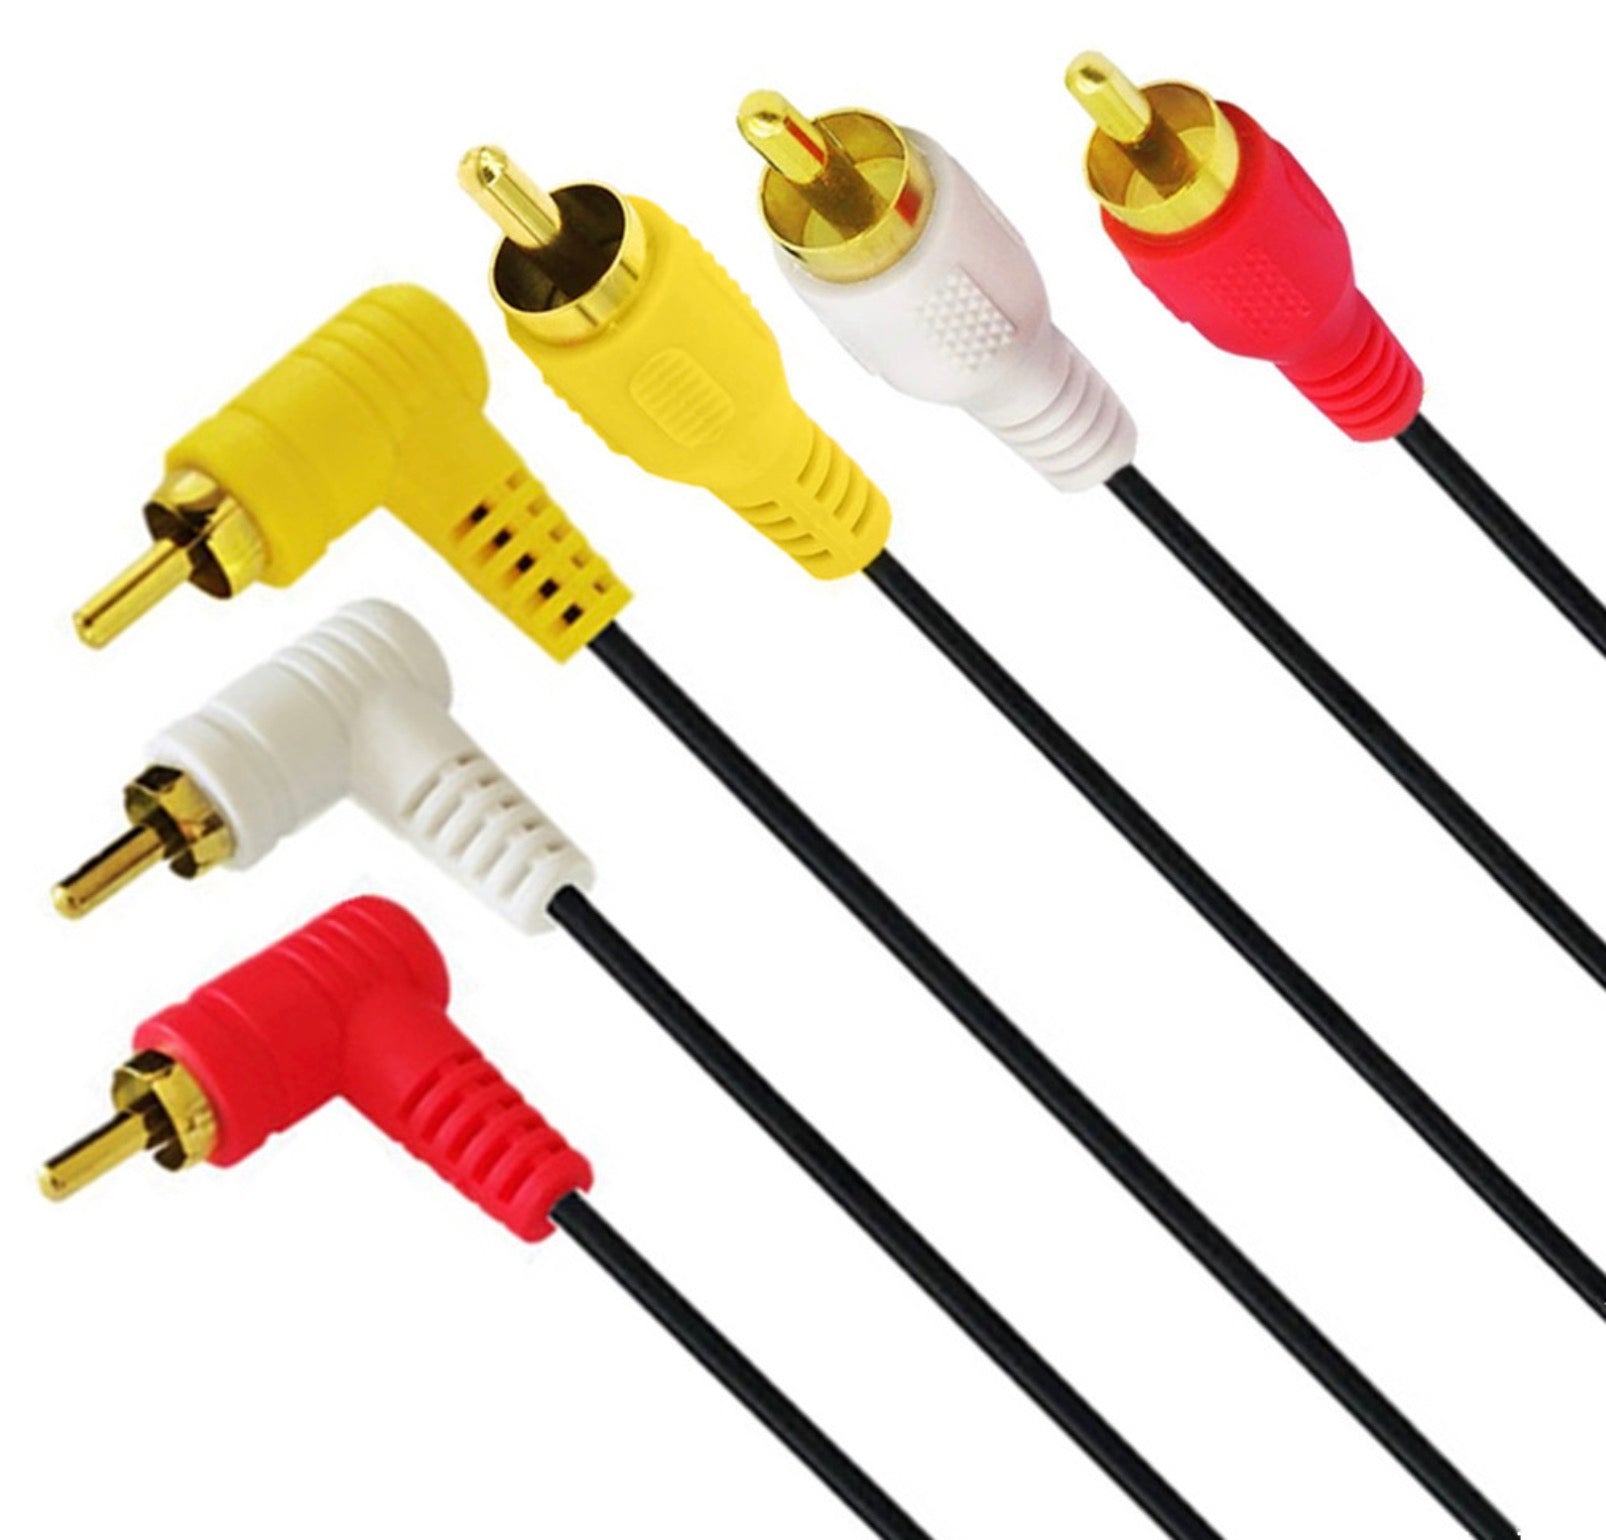 3 RCA Male to Angled RCA Male Composite Video Audio Cable 1.5m